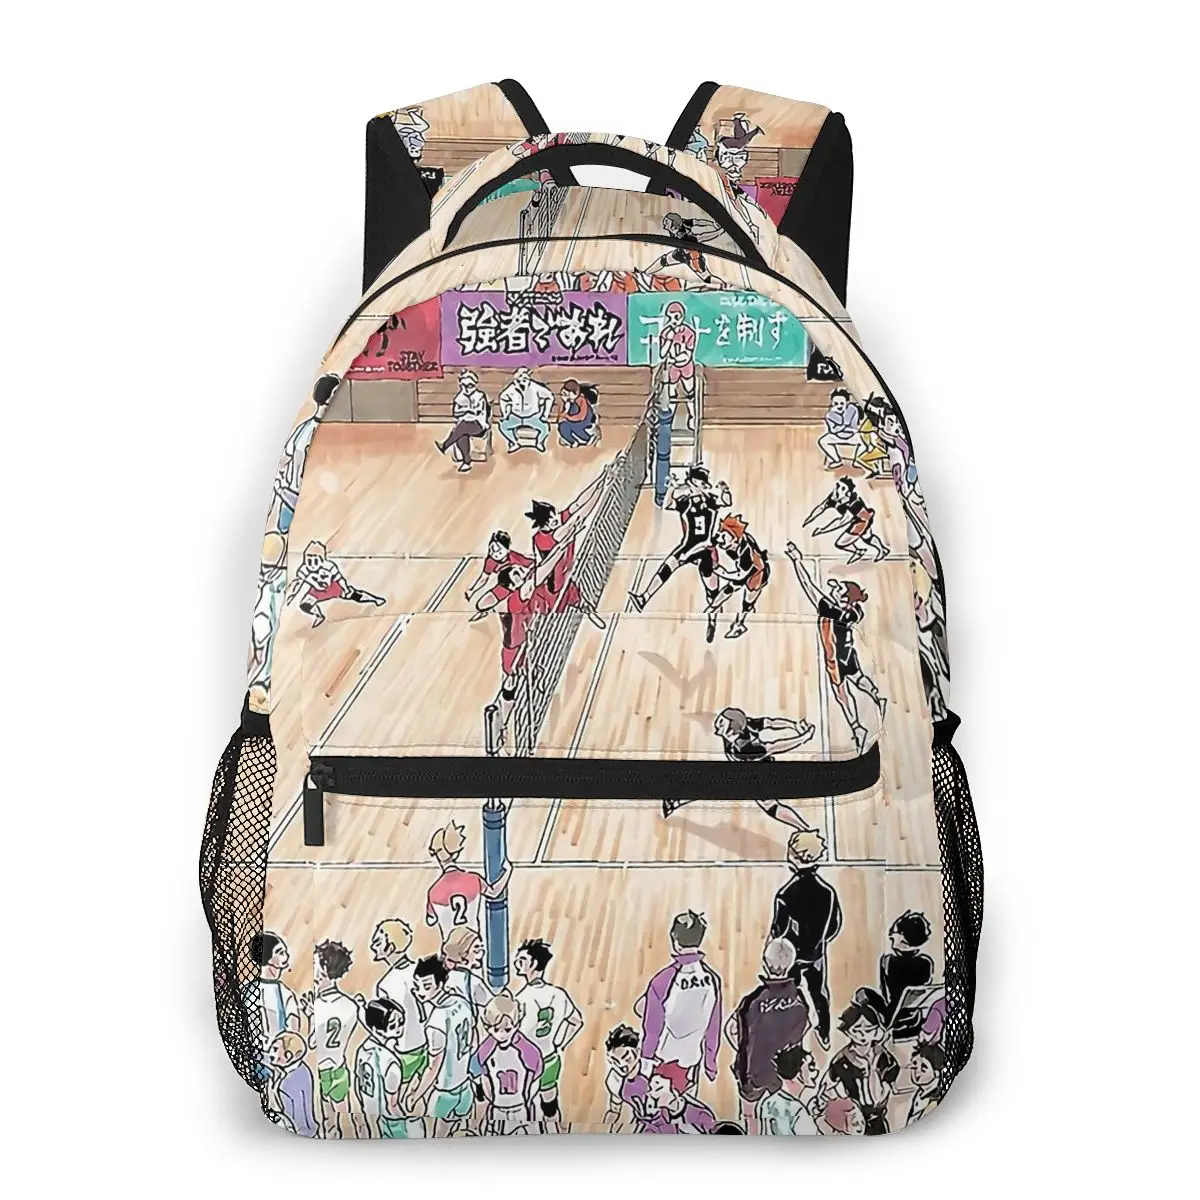 

Awesome Haikyuu Poster Backpack Backpack for Girls Boys Volleyball Boys Travel Rucksack Backpacks for Teenage school bag Adults